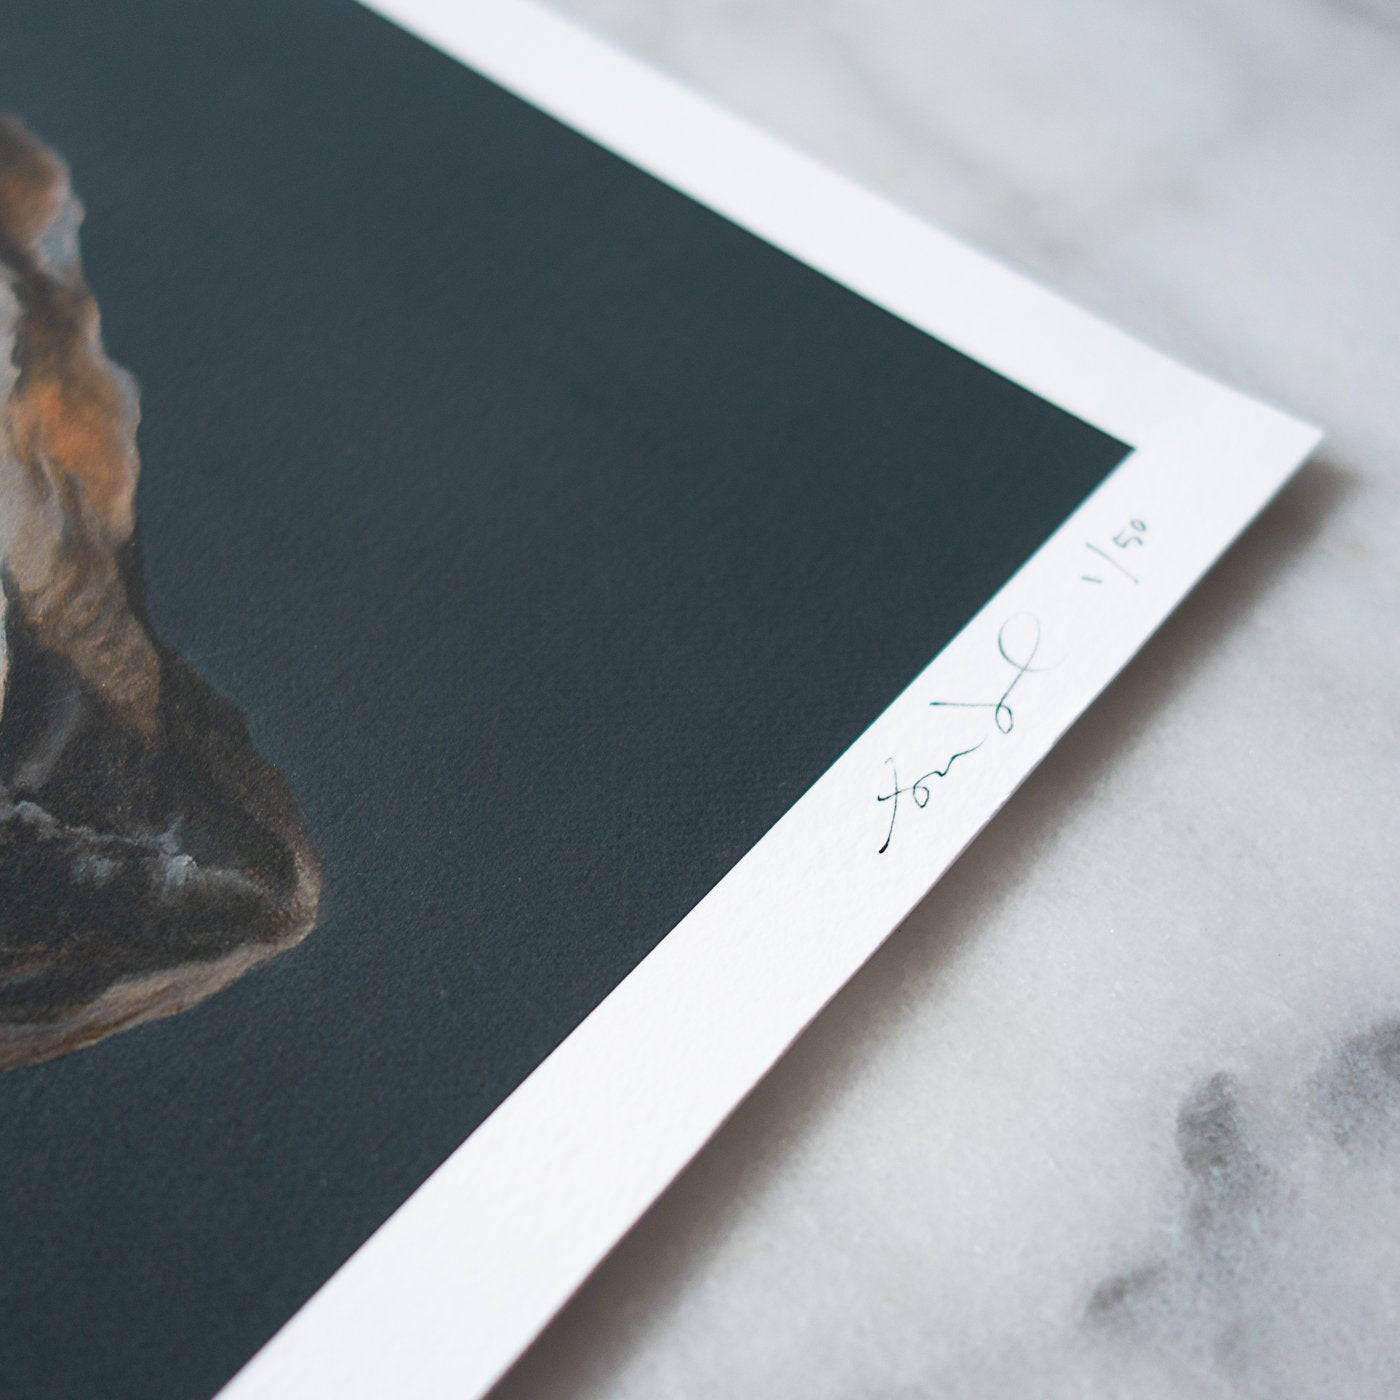 Set of 2 Shell Limited Edition Prints | Mussel Shell & Light Clam Shell No. 2